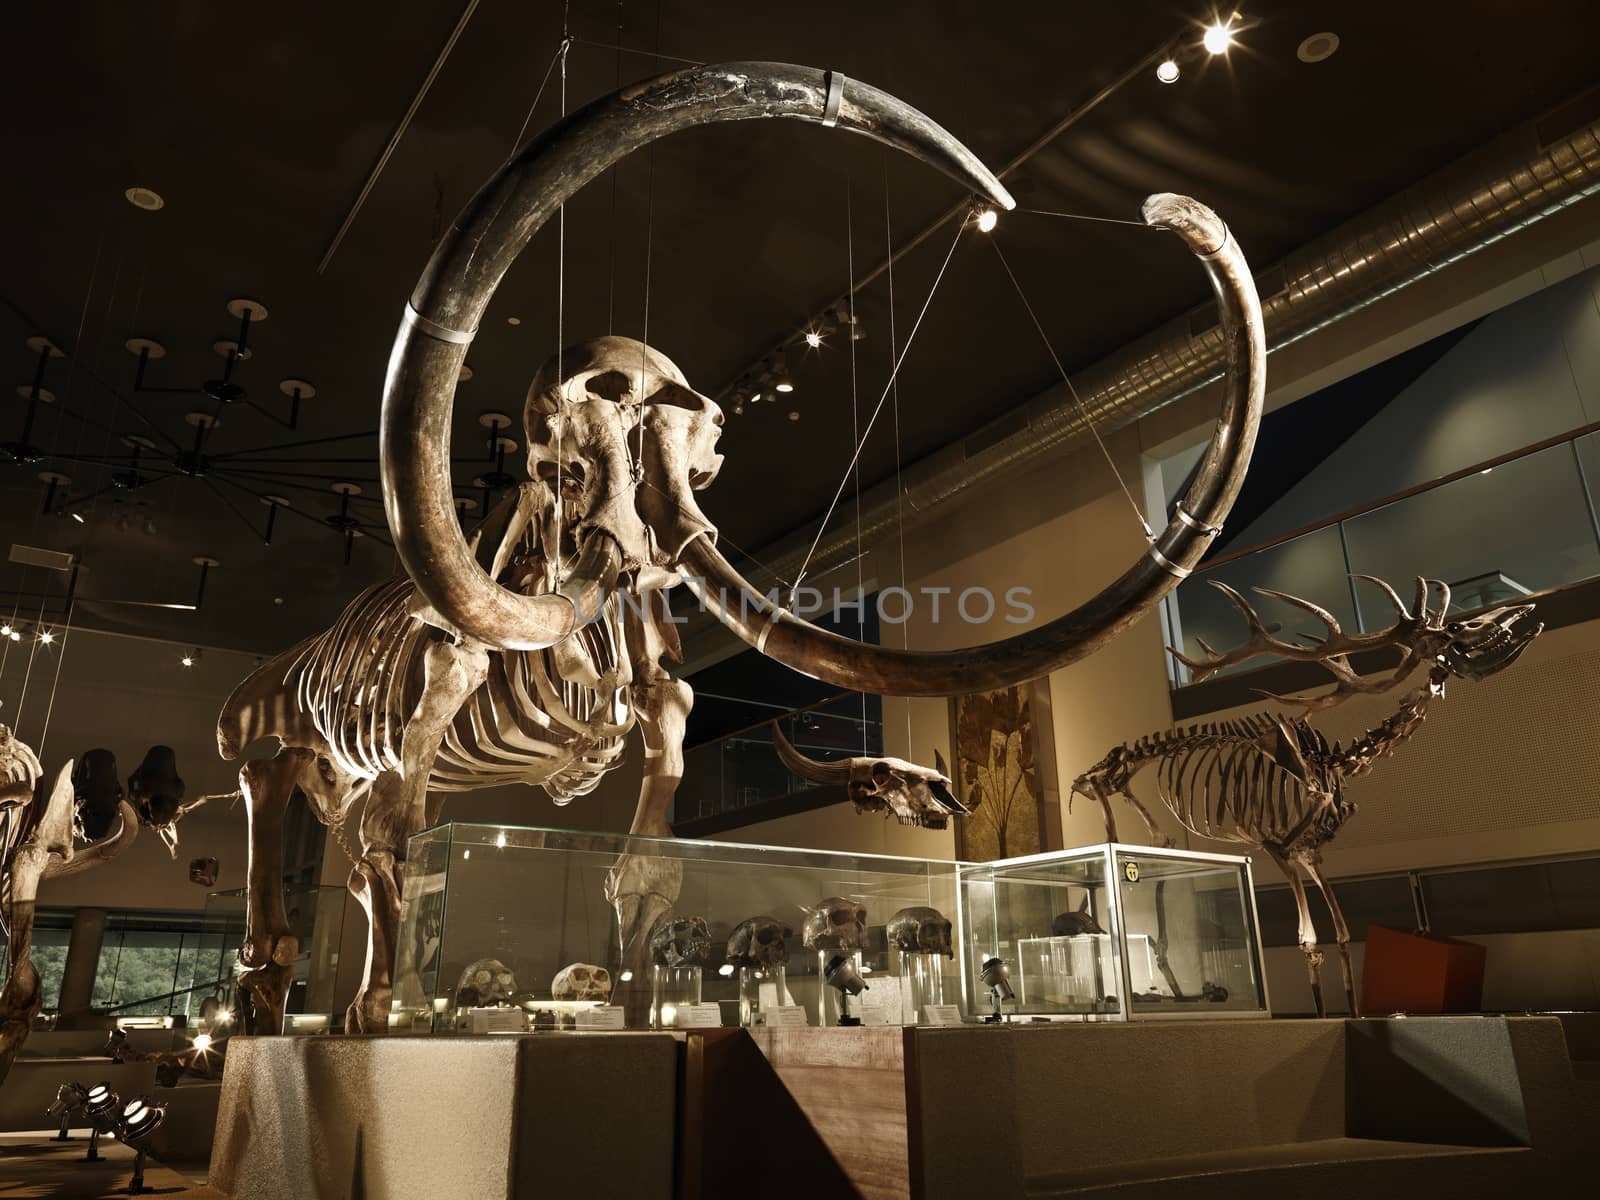 Large mammoth skeleton in museum with backlight by janssenkruseproductions